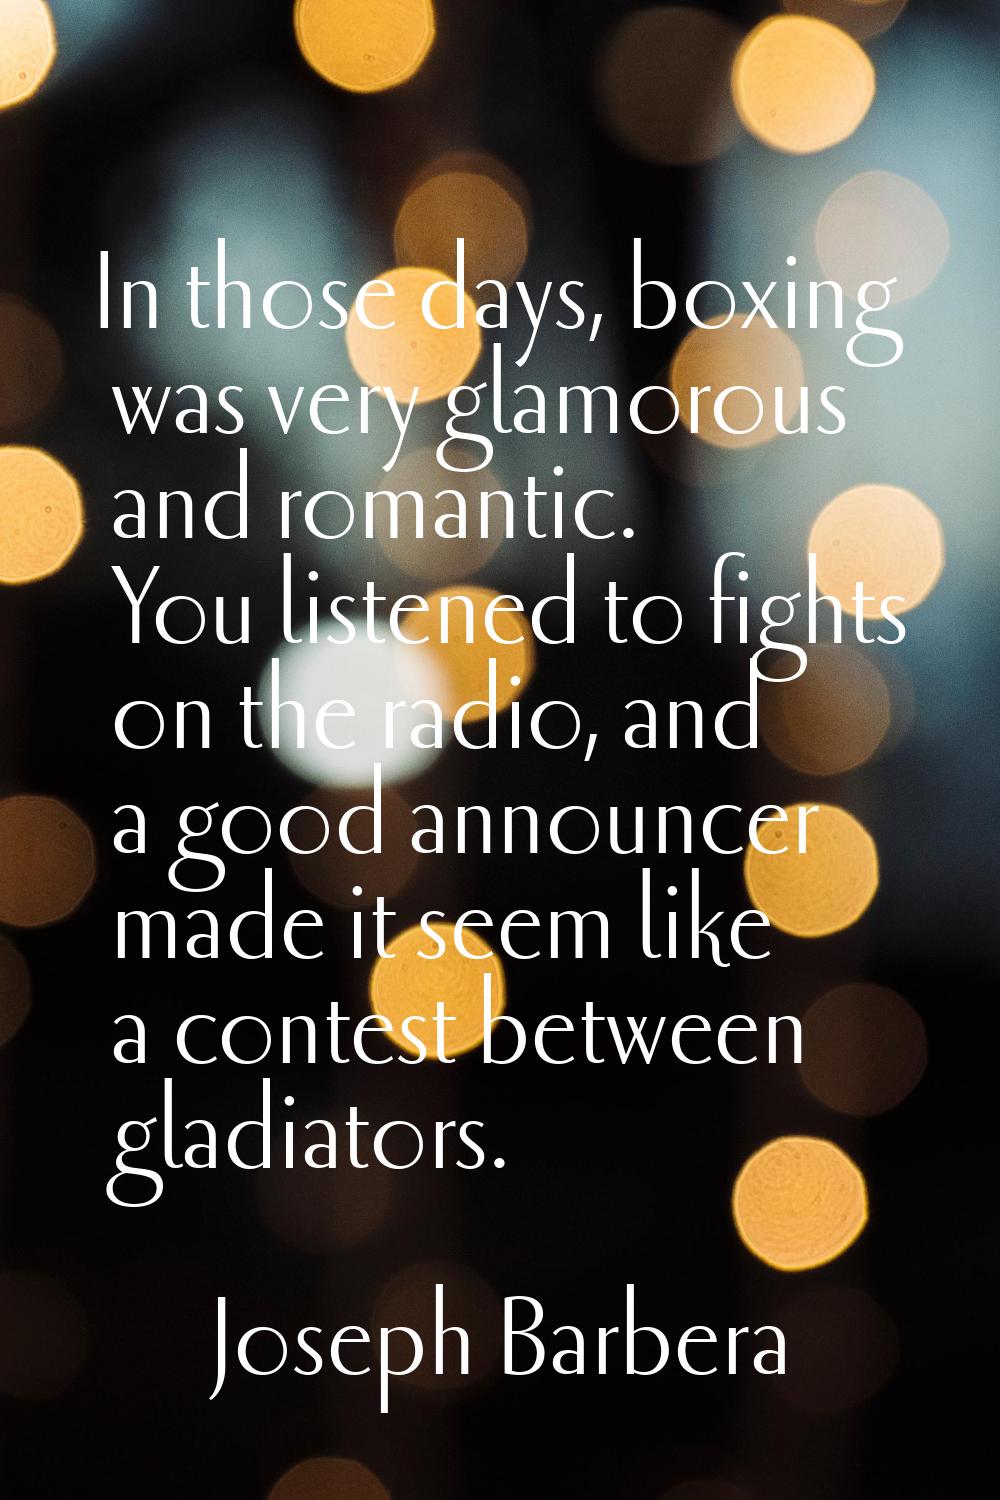 In those days, boxing was very glamorous and romantic. You listened to fights on the radio, and a g